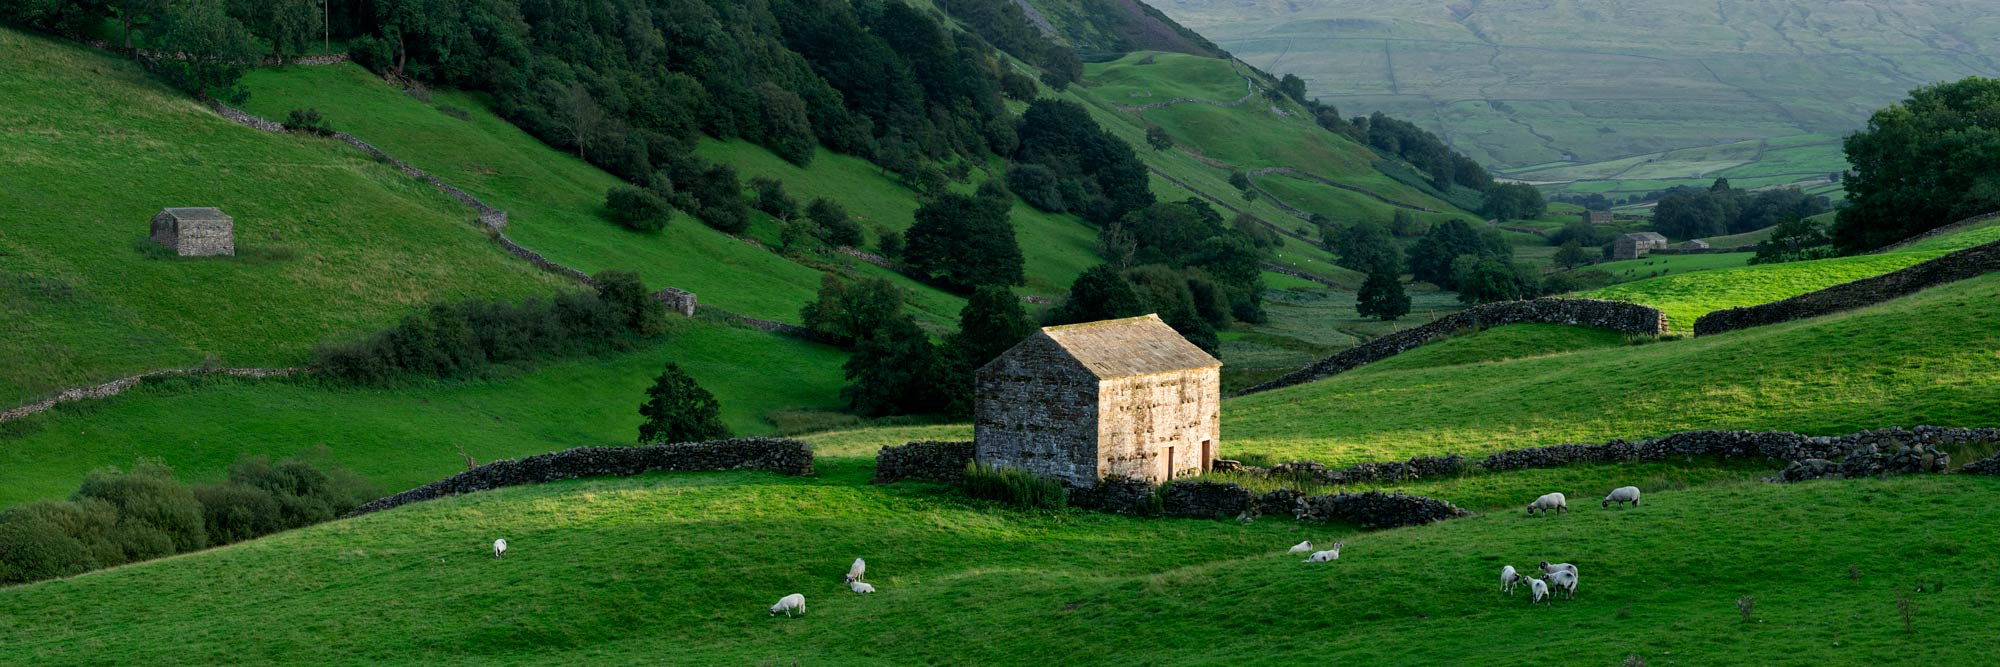 North Yorkshire dales scene in England